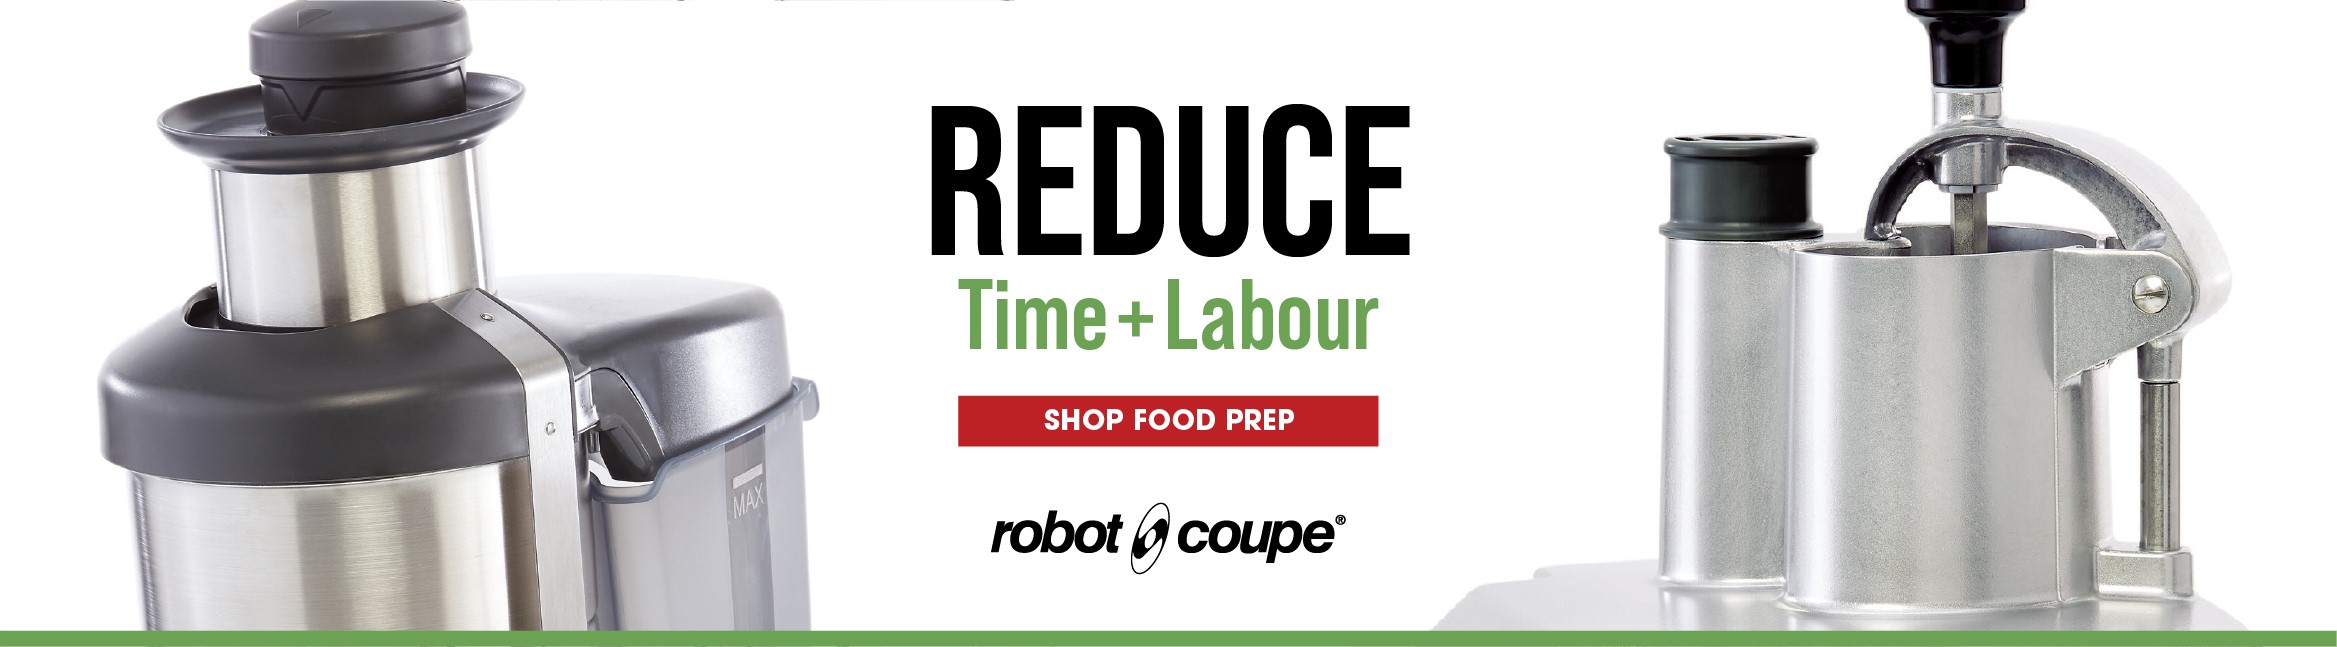 Make meal prep an ease with Robot Coupe!